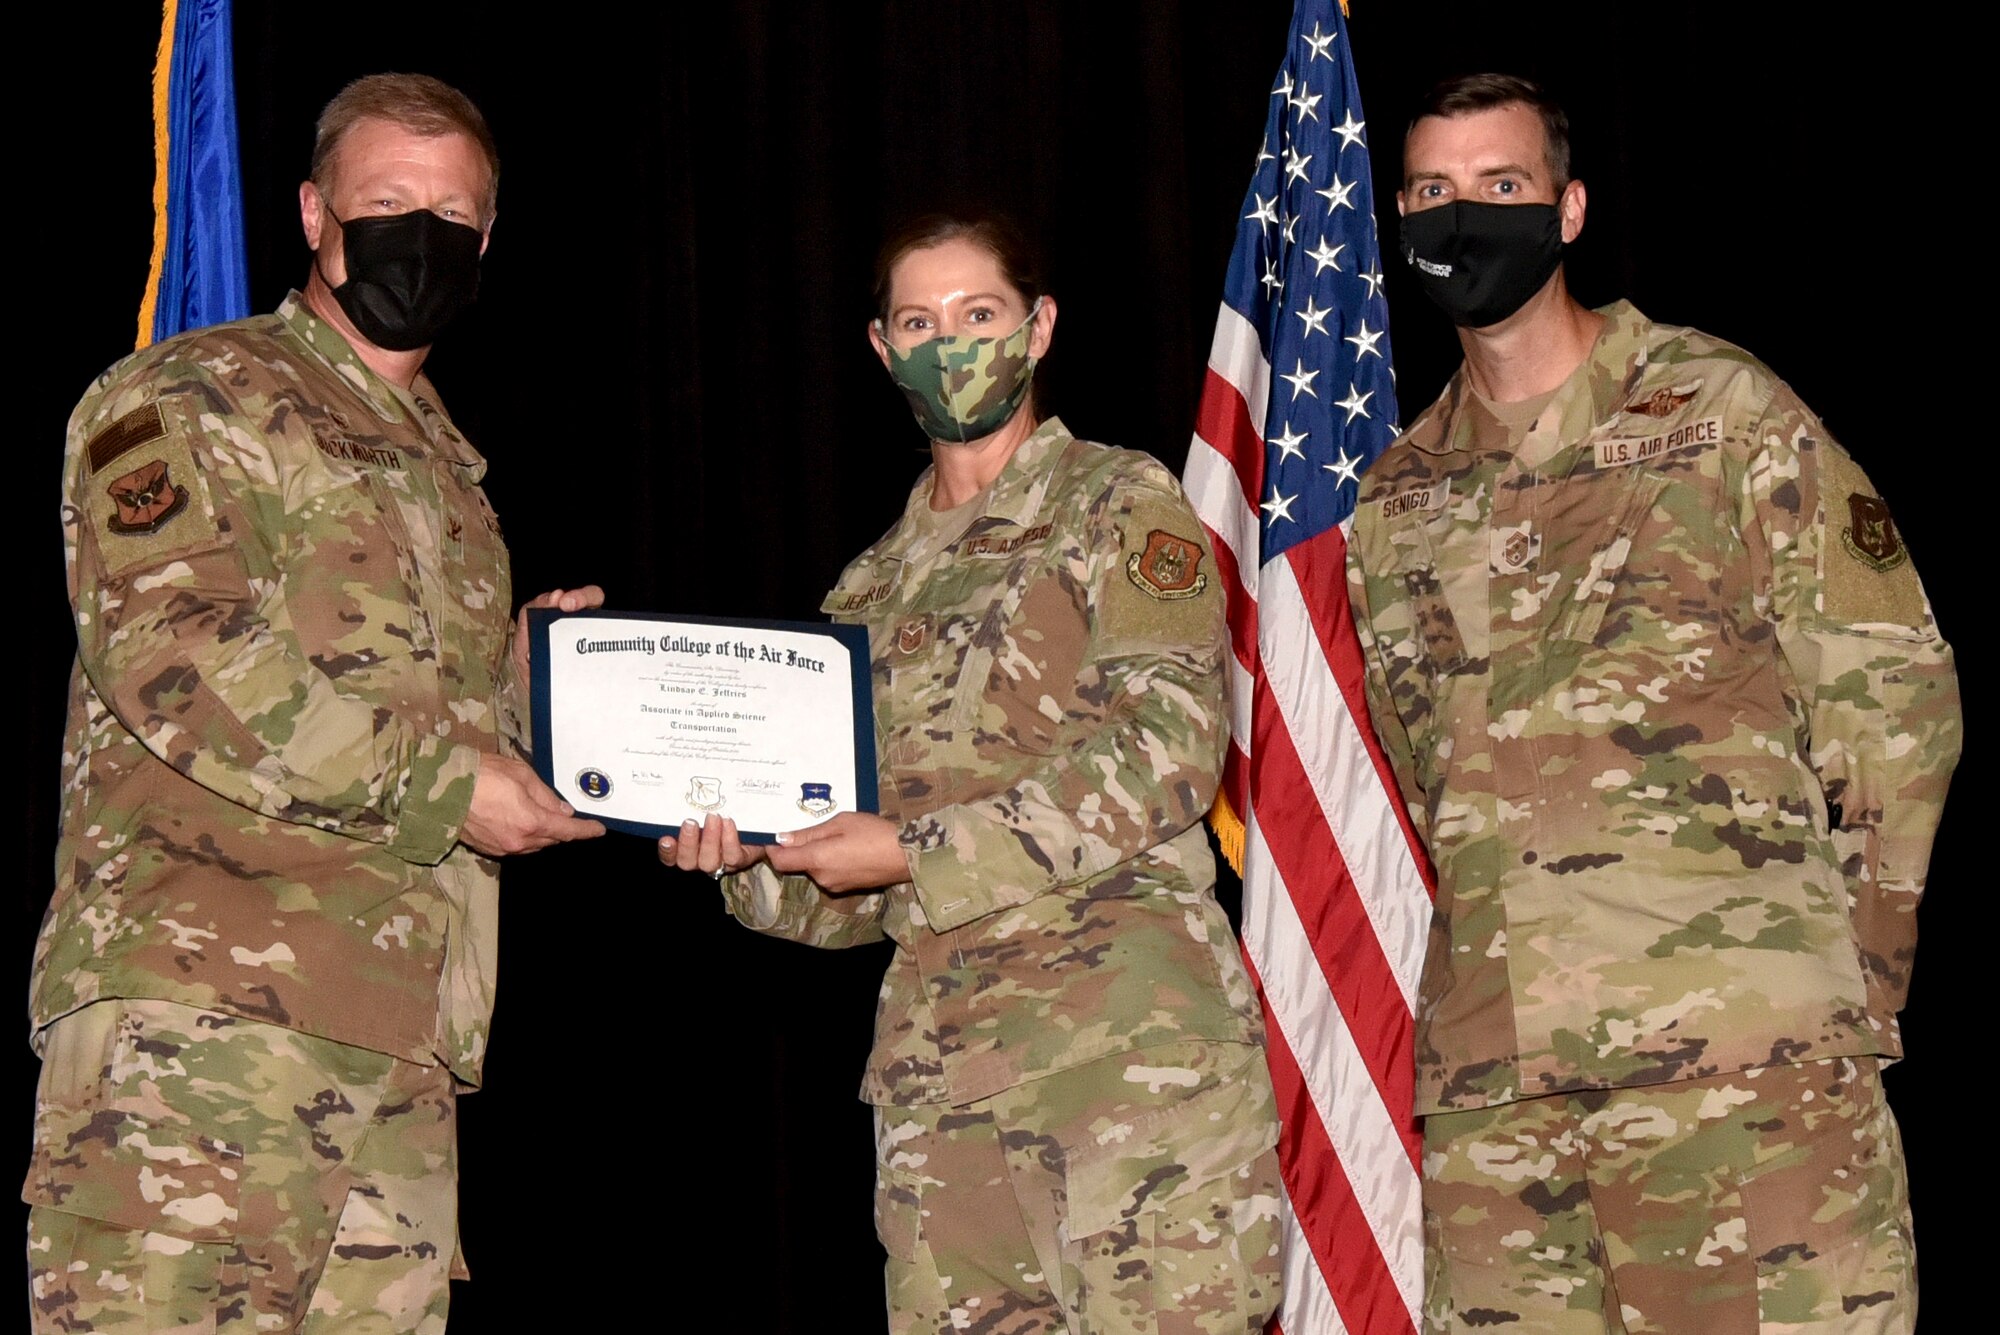 (center) Tech. Sgt. Lindsay Jeffries, 73rd Aerial Port Squdron, receives their Community College of the Air Force degree from (left) Col. Allen Duckworth, 301 FW commander, and (right) Chief Master Sgt. Michael Senigo, 301 FW command chief, during a graduation ceremony at U.S. Naval Air Station Joint Reserve Base Fort Worth, Texas, August 7, 2021. The CCAF degree is awarded to Airmen who have completed the requirements for an Associate of Applied Science Degree. (U.S. Air Force photo by Staff Sgt. Randall Moose)